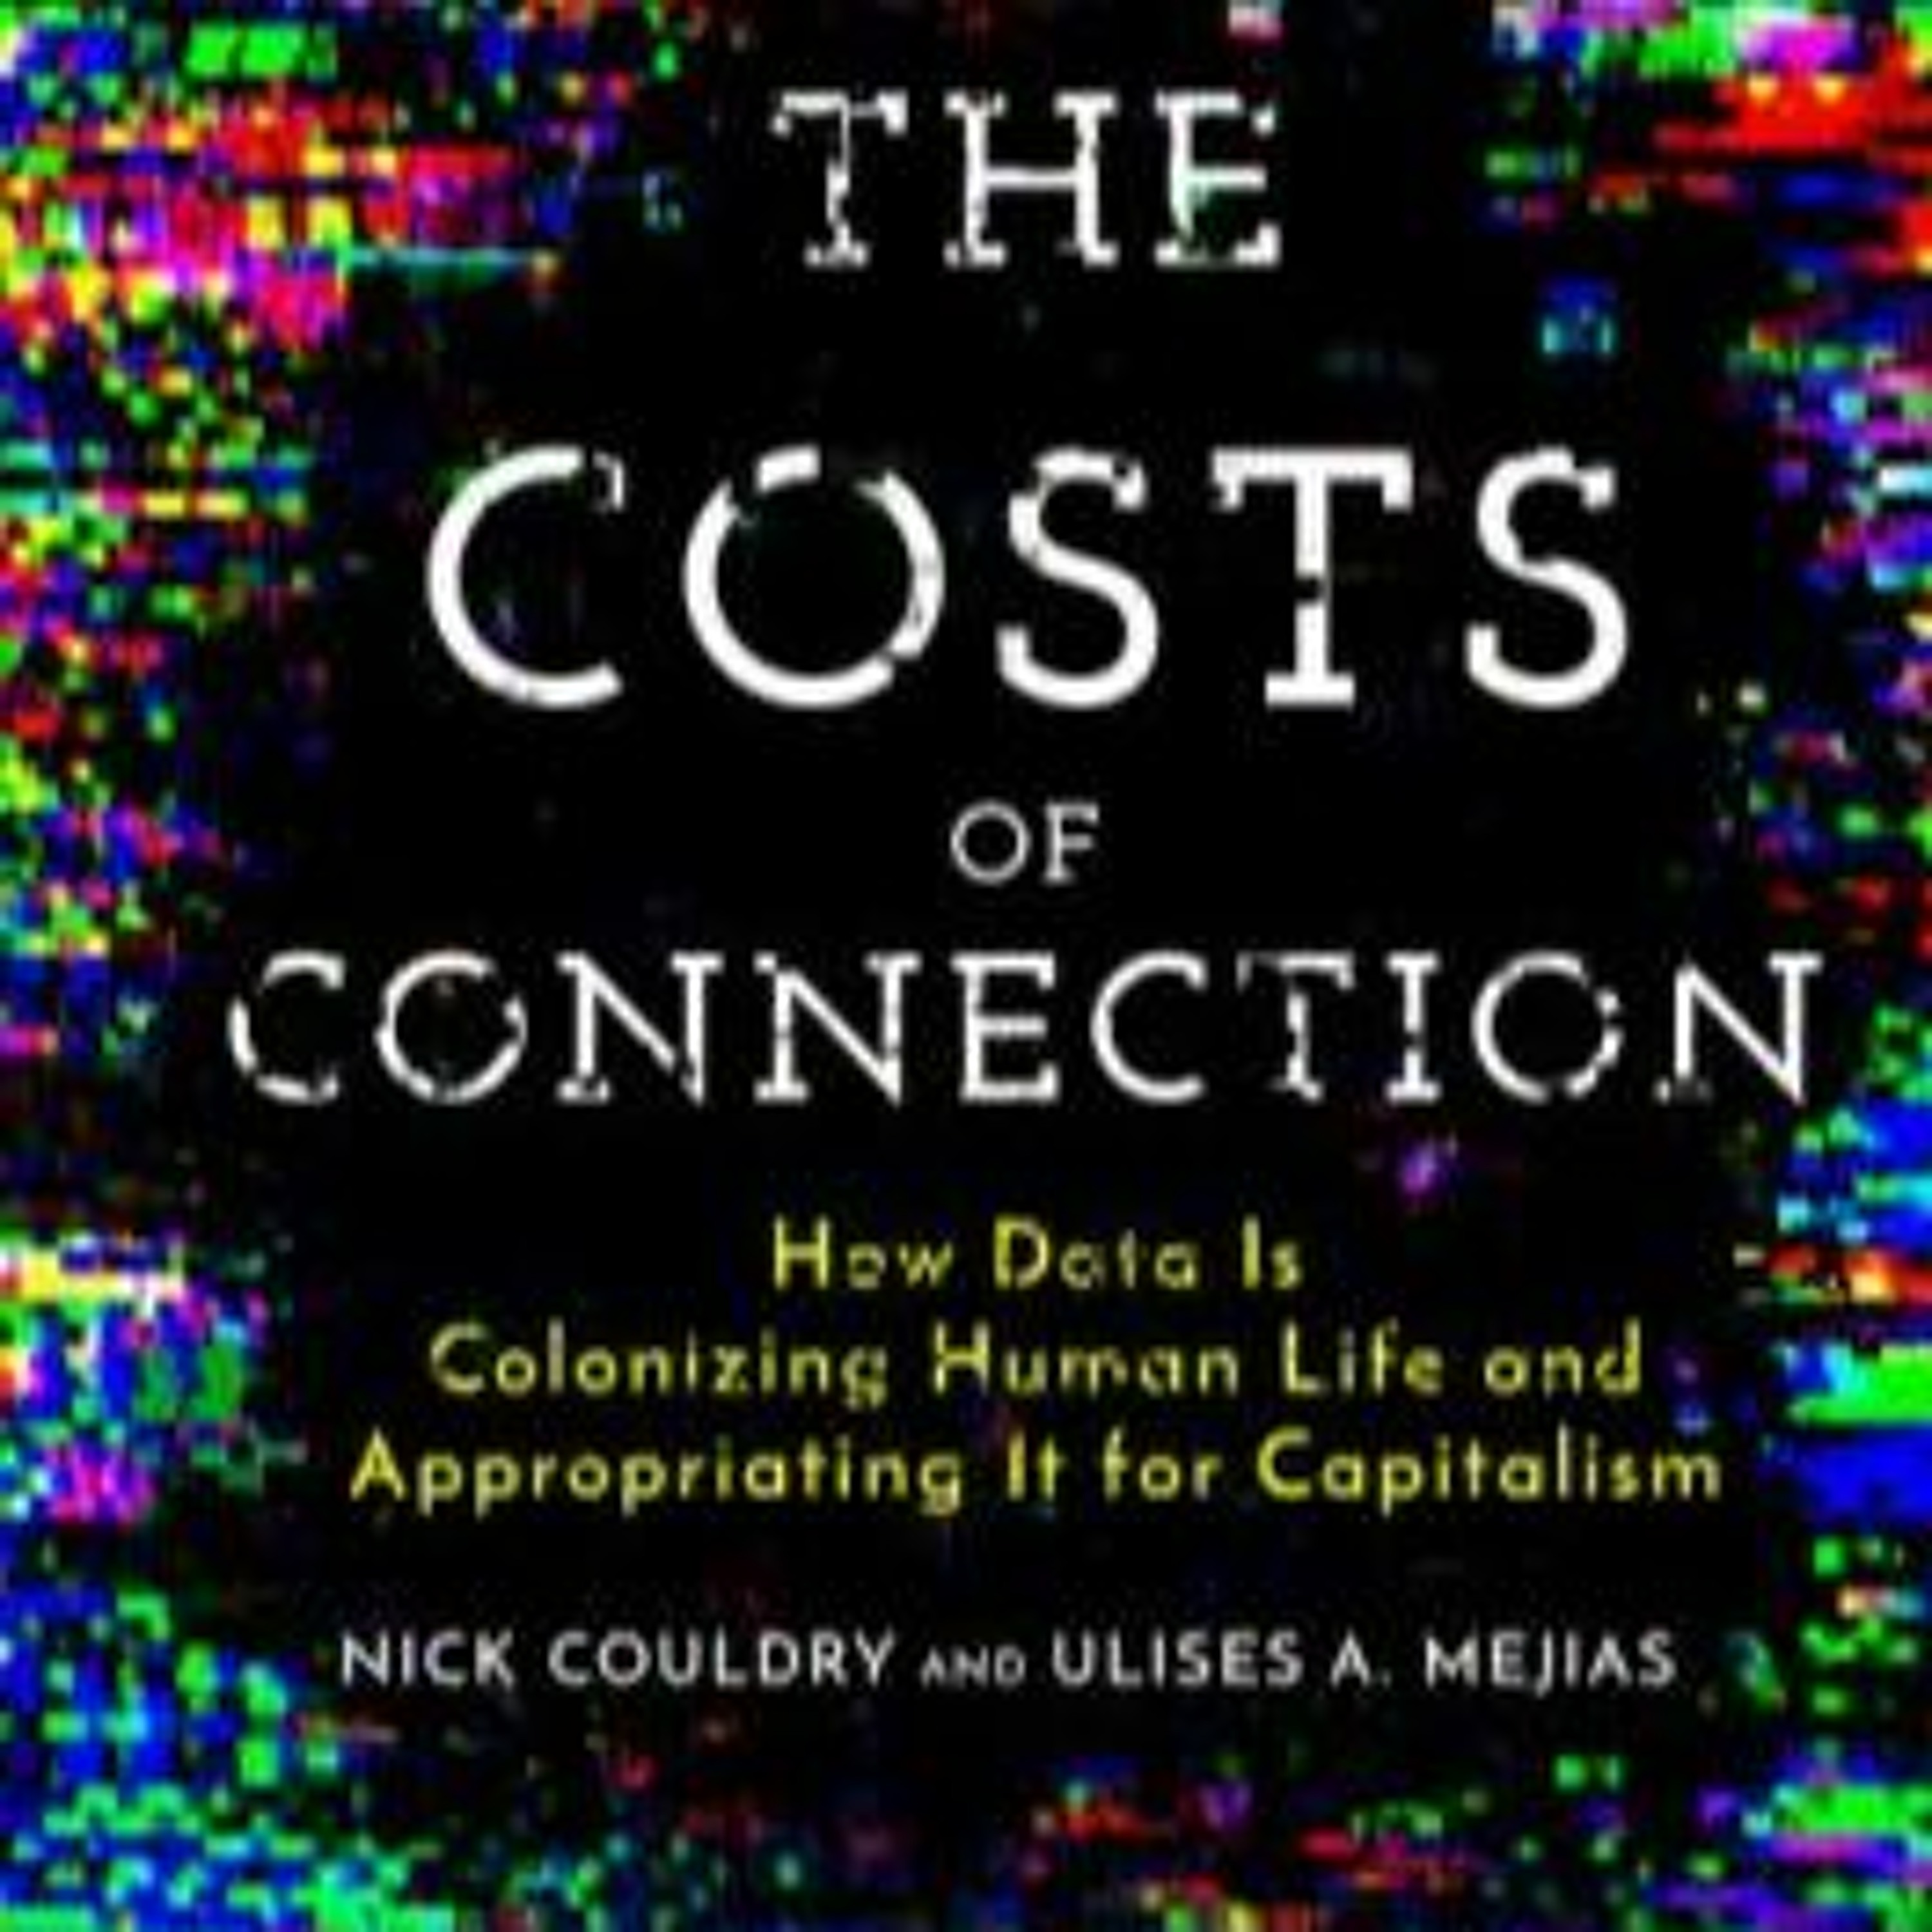 Colonized by Data: The Costs of Connection with Nick Couldry and Ulises Mejias